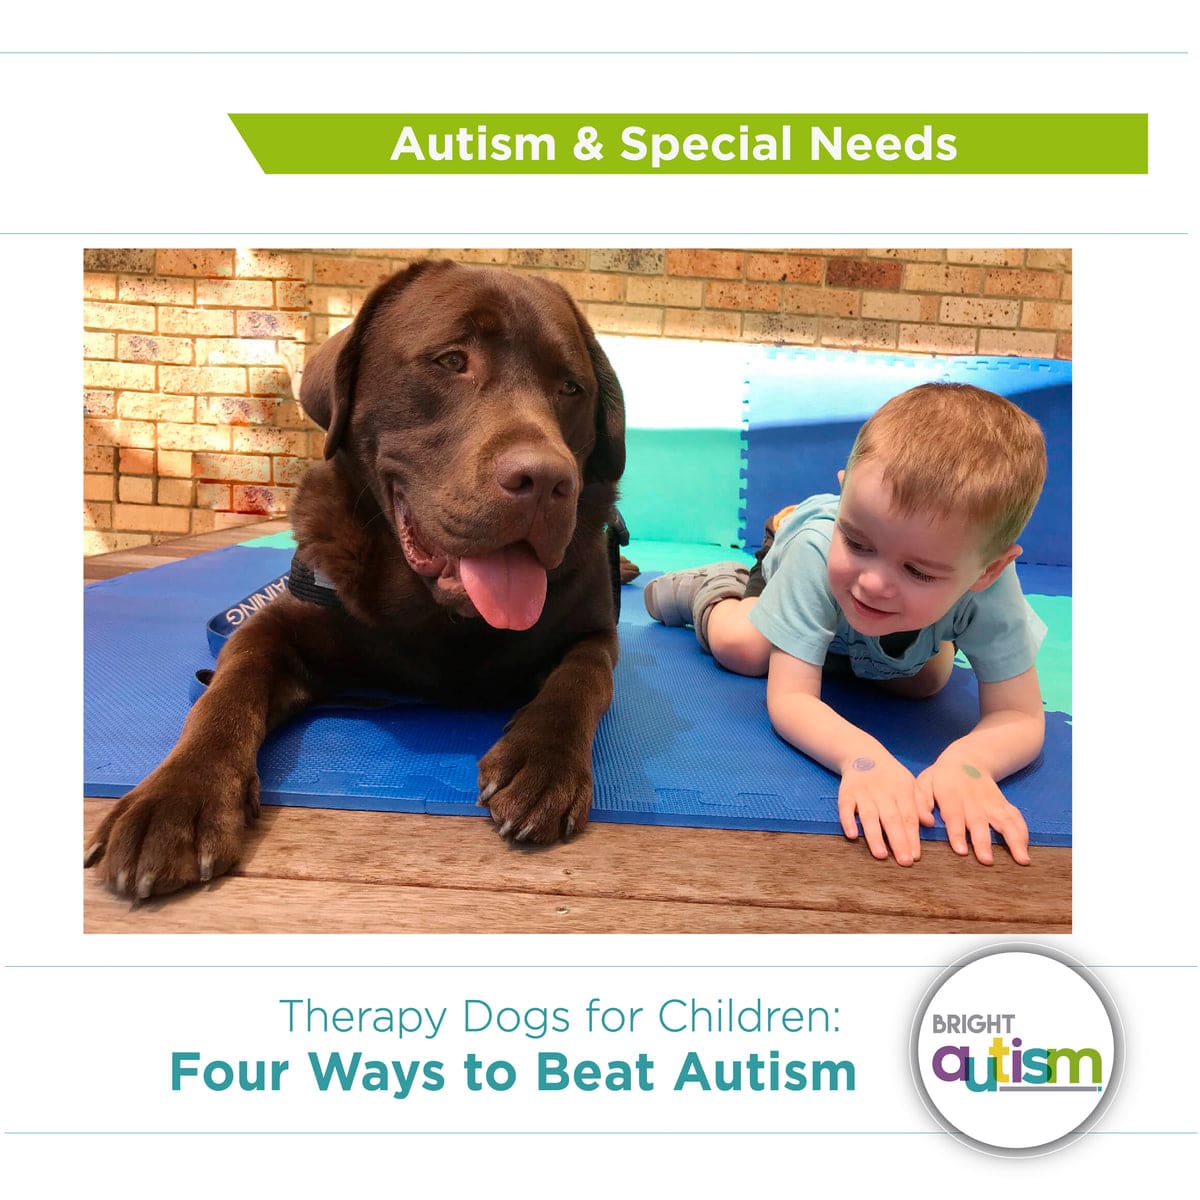 How Dogs can help children with autism?